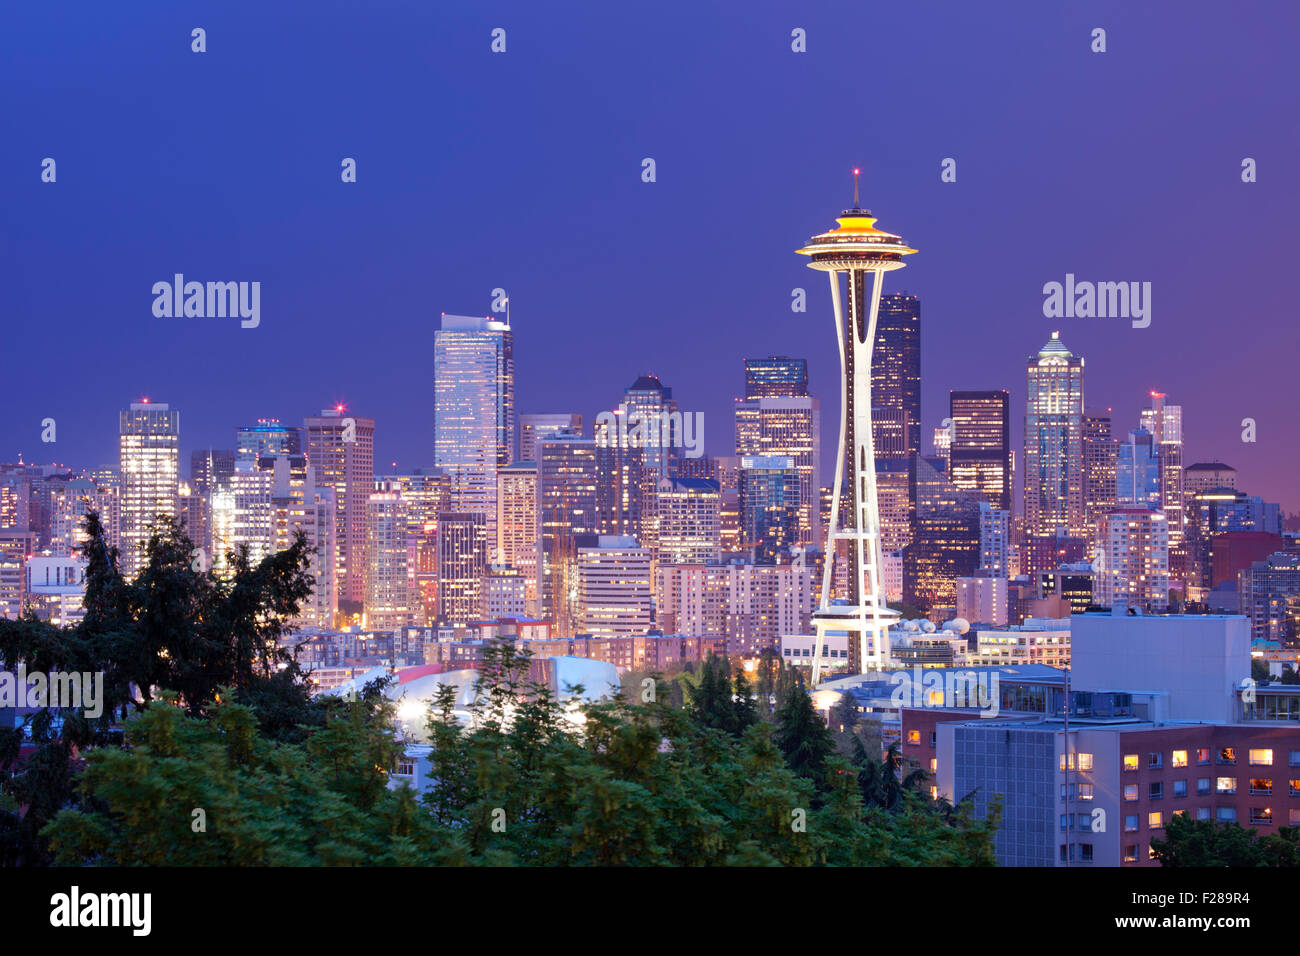 The Space Needle and the skyline of Seattle in Washington, USA. Photographed at night. Stock Photo